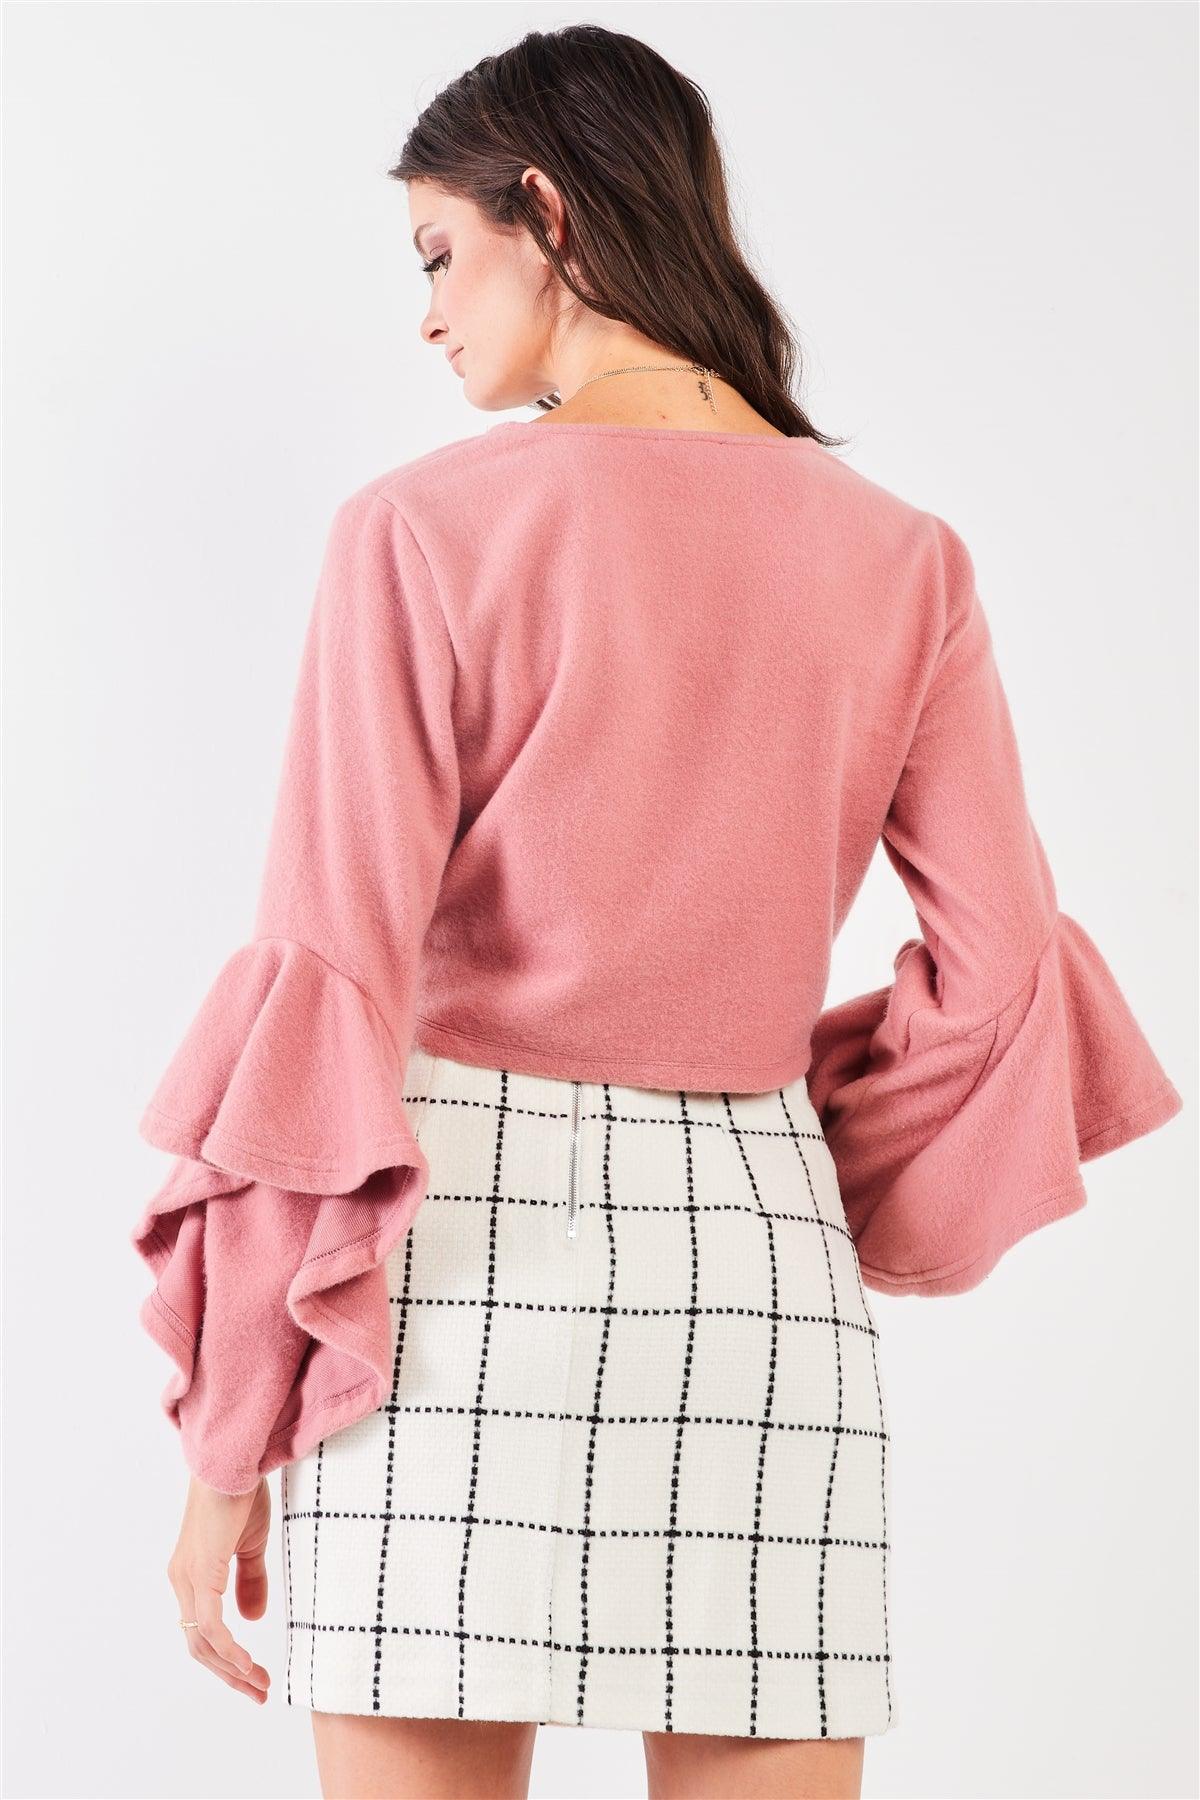 Blush Fuzzy Long Ruffle Sleeve V-Neck Self-Tie Front Detail Cropped Top /2-1-3